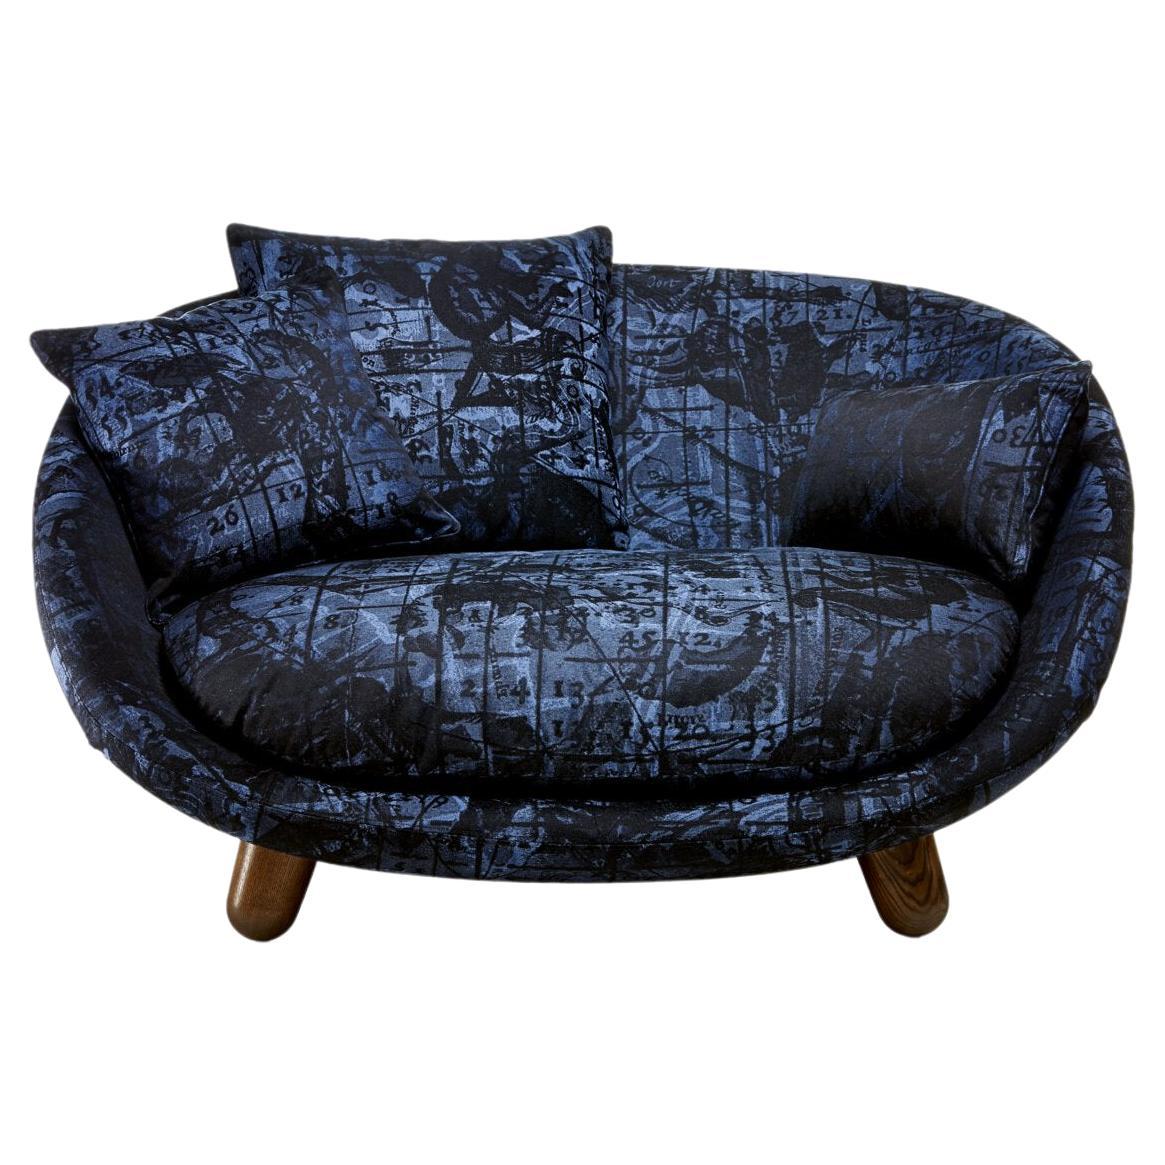 Moooi Love Sofa in Jacquard, Andaz Upholstery & Cinnamon Stained Legs